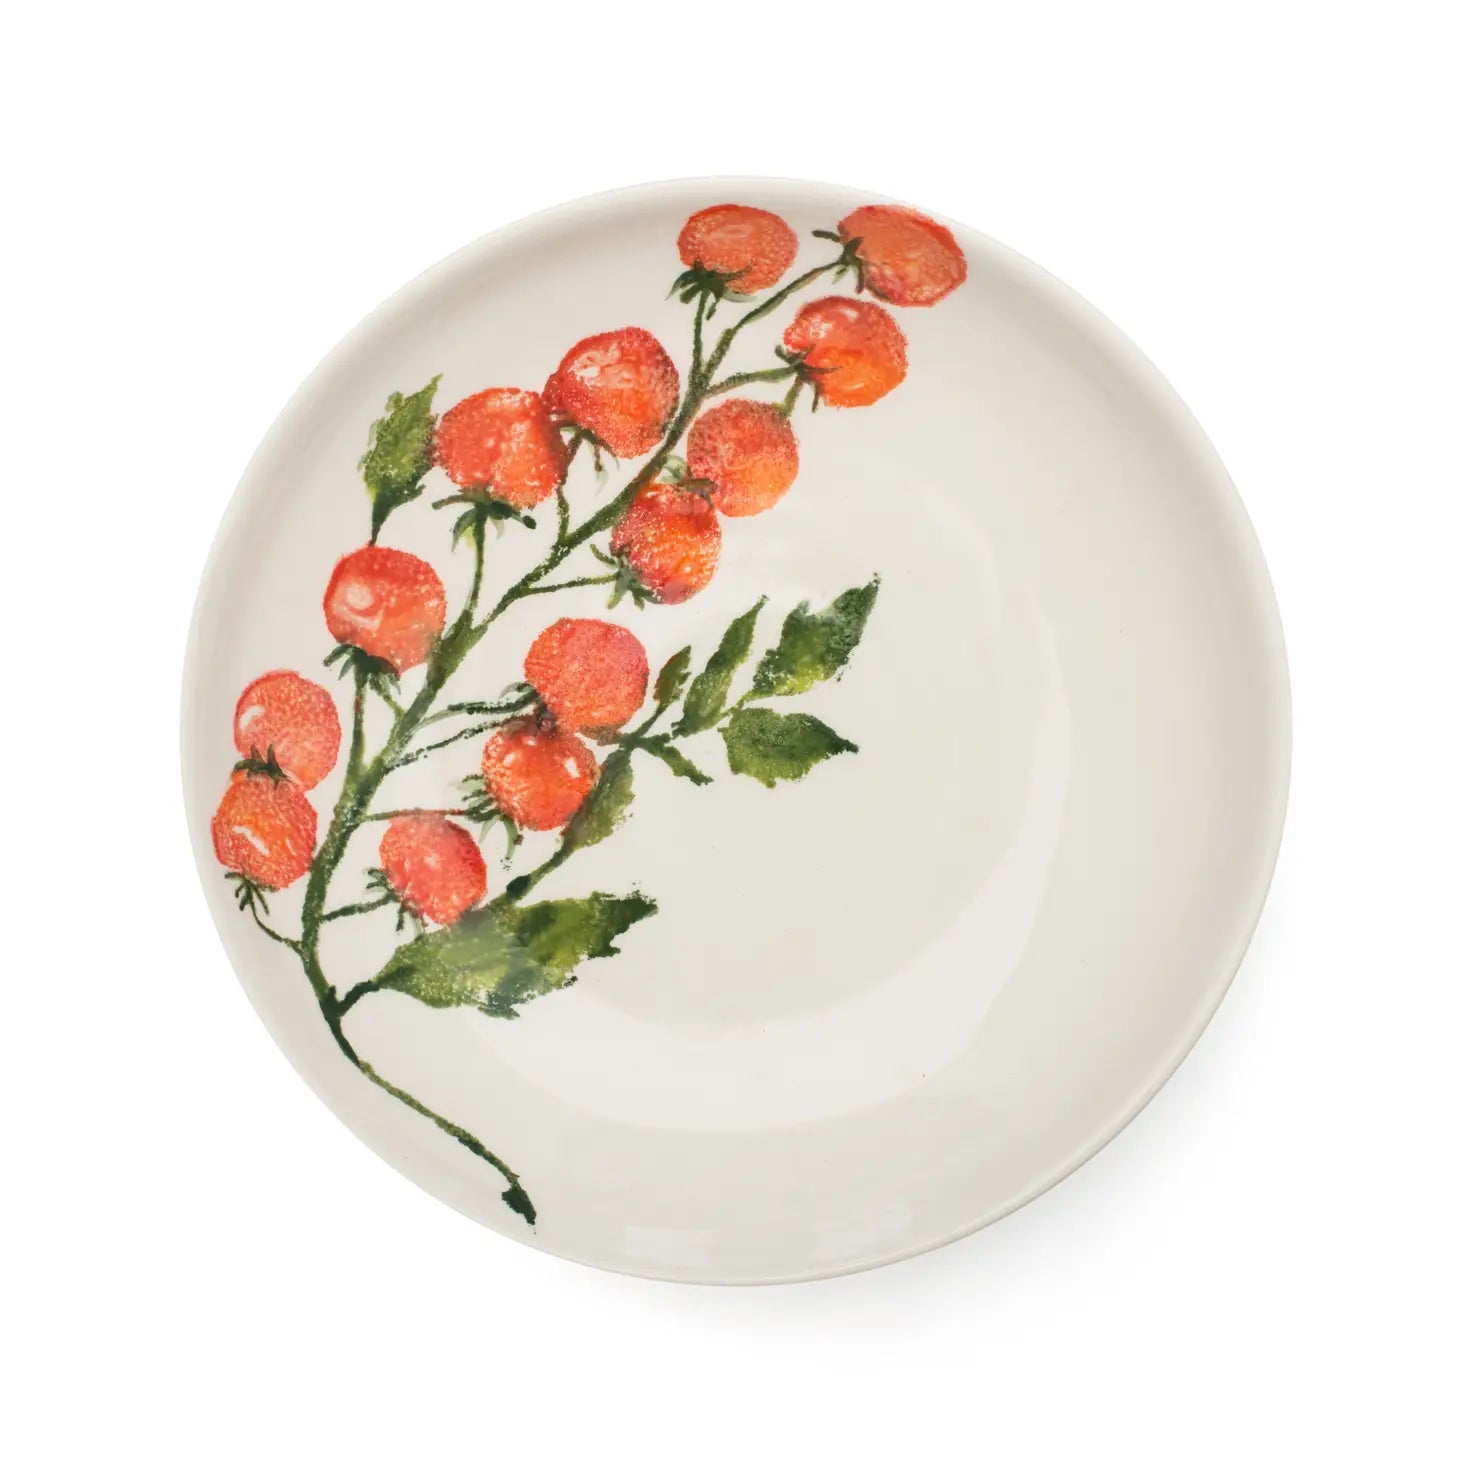 Supper bowl / pasta bowl featuring cherry tomatoes on the vine on a white background